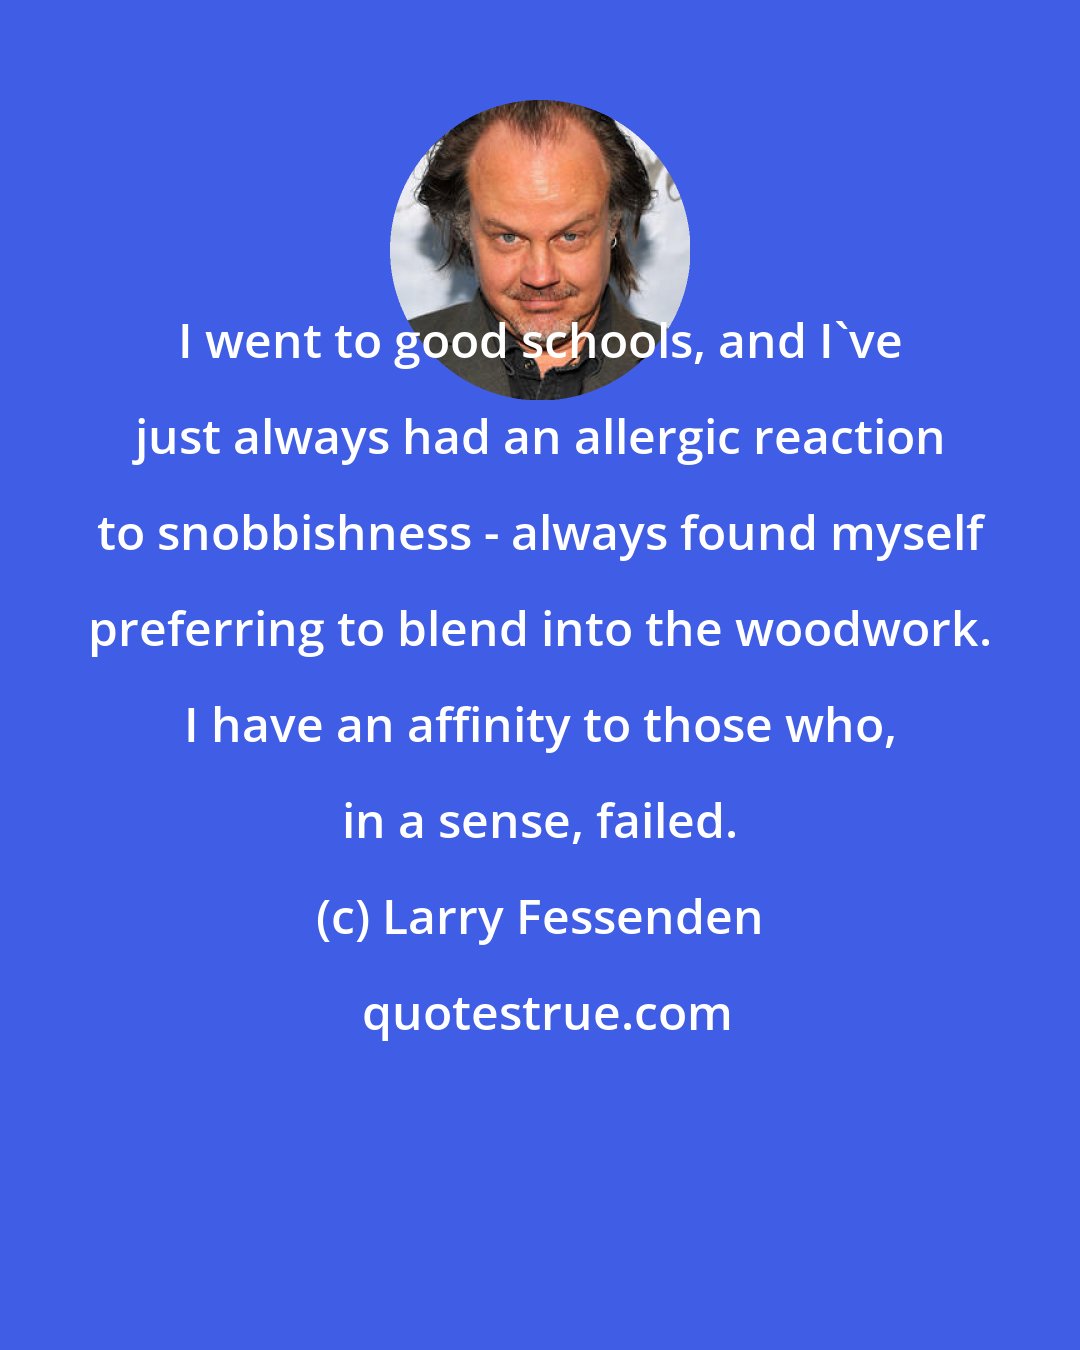 Larry Fessenden: I went to good schools, and I've just always had an allergic reaction to snobbishness - always found myself preferring to blend into the woodwork. I have an affinity to those who, in a sense, failed.